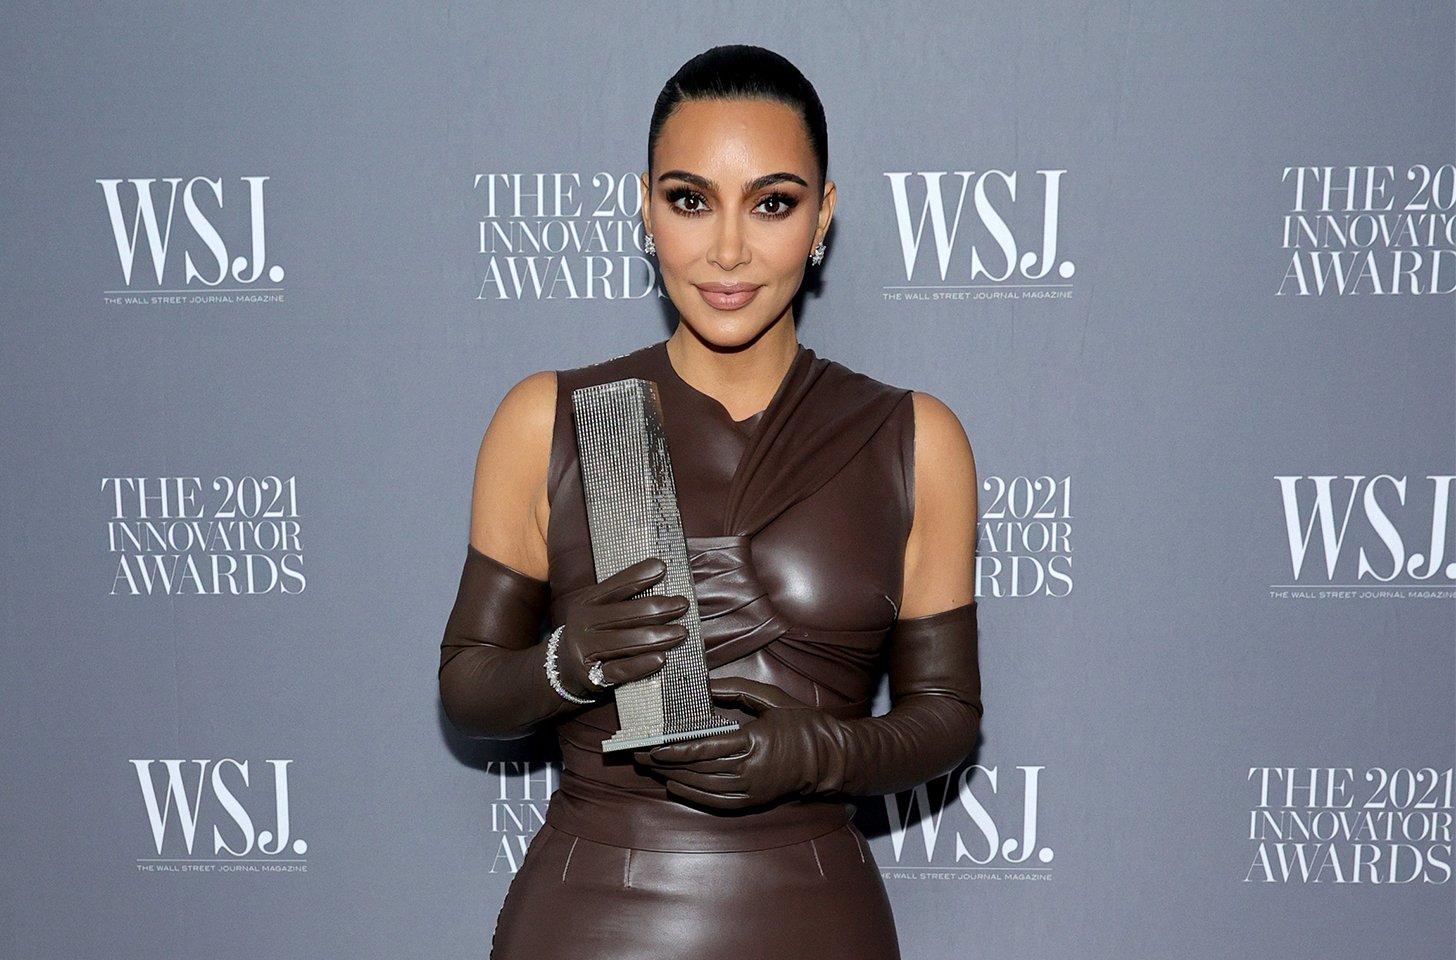 Kim Kardashian looks completely unrecognizable in this post